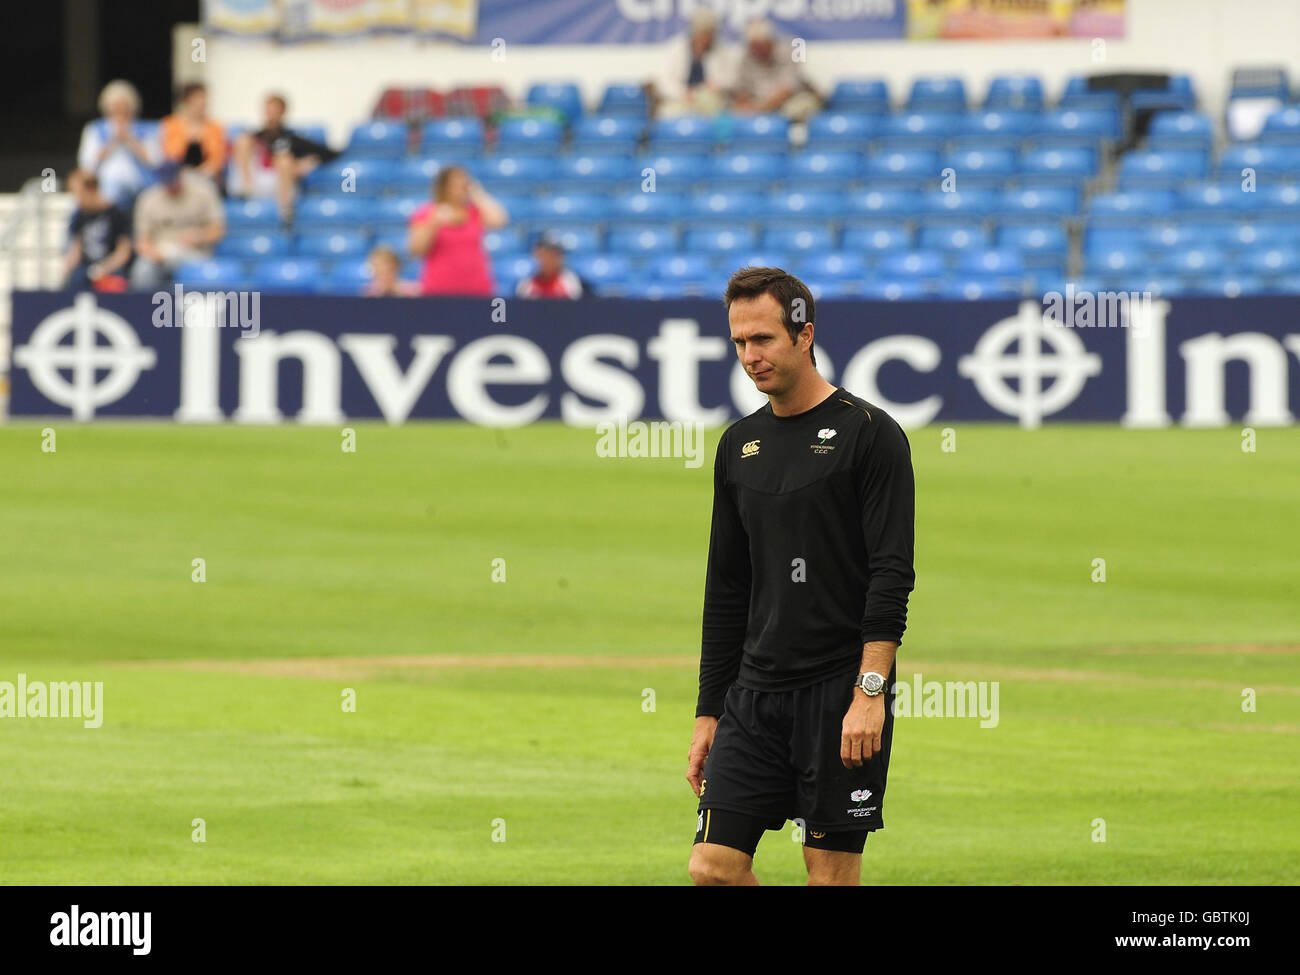 Former England Cricket Captain Michael Vaughan on the Headingley pitch after talking to his Yorkshire Cricket Club colleagues at Headingley Carnegie, Leeds. Stock Photo